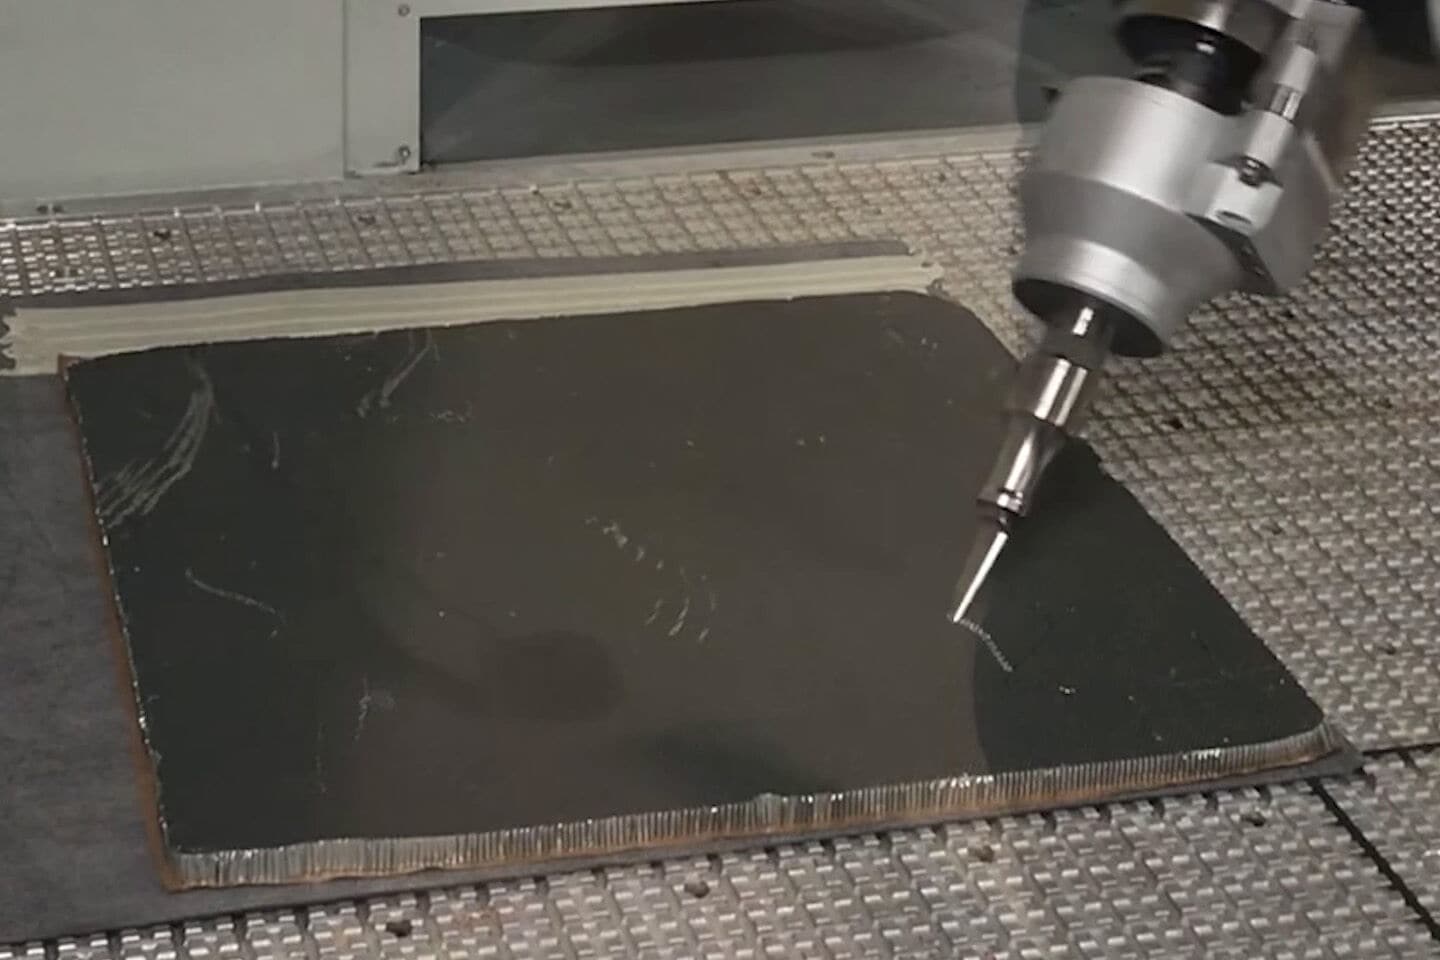 Cutting composite fibers or honeycomb? CMS has the technology for you! 